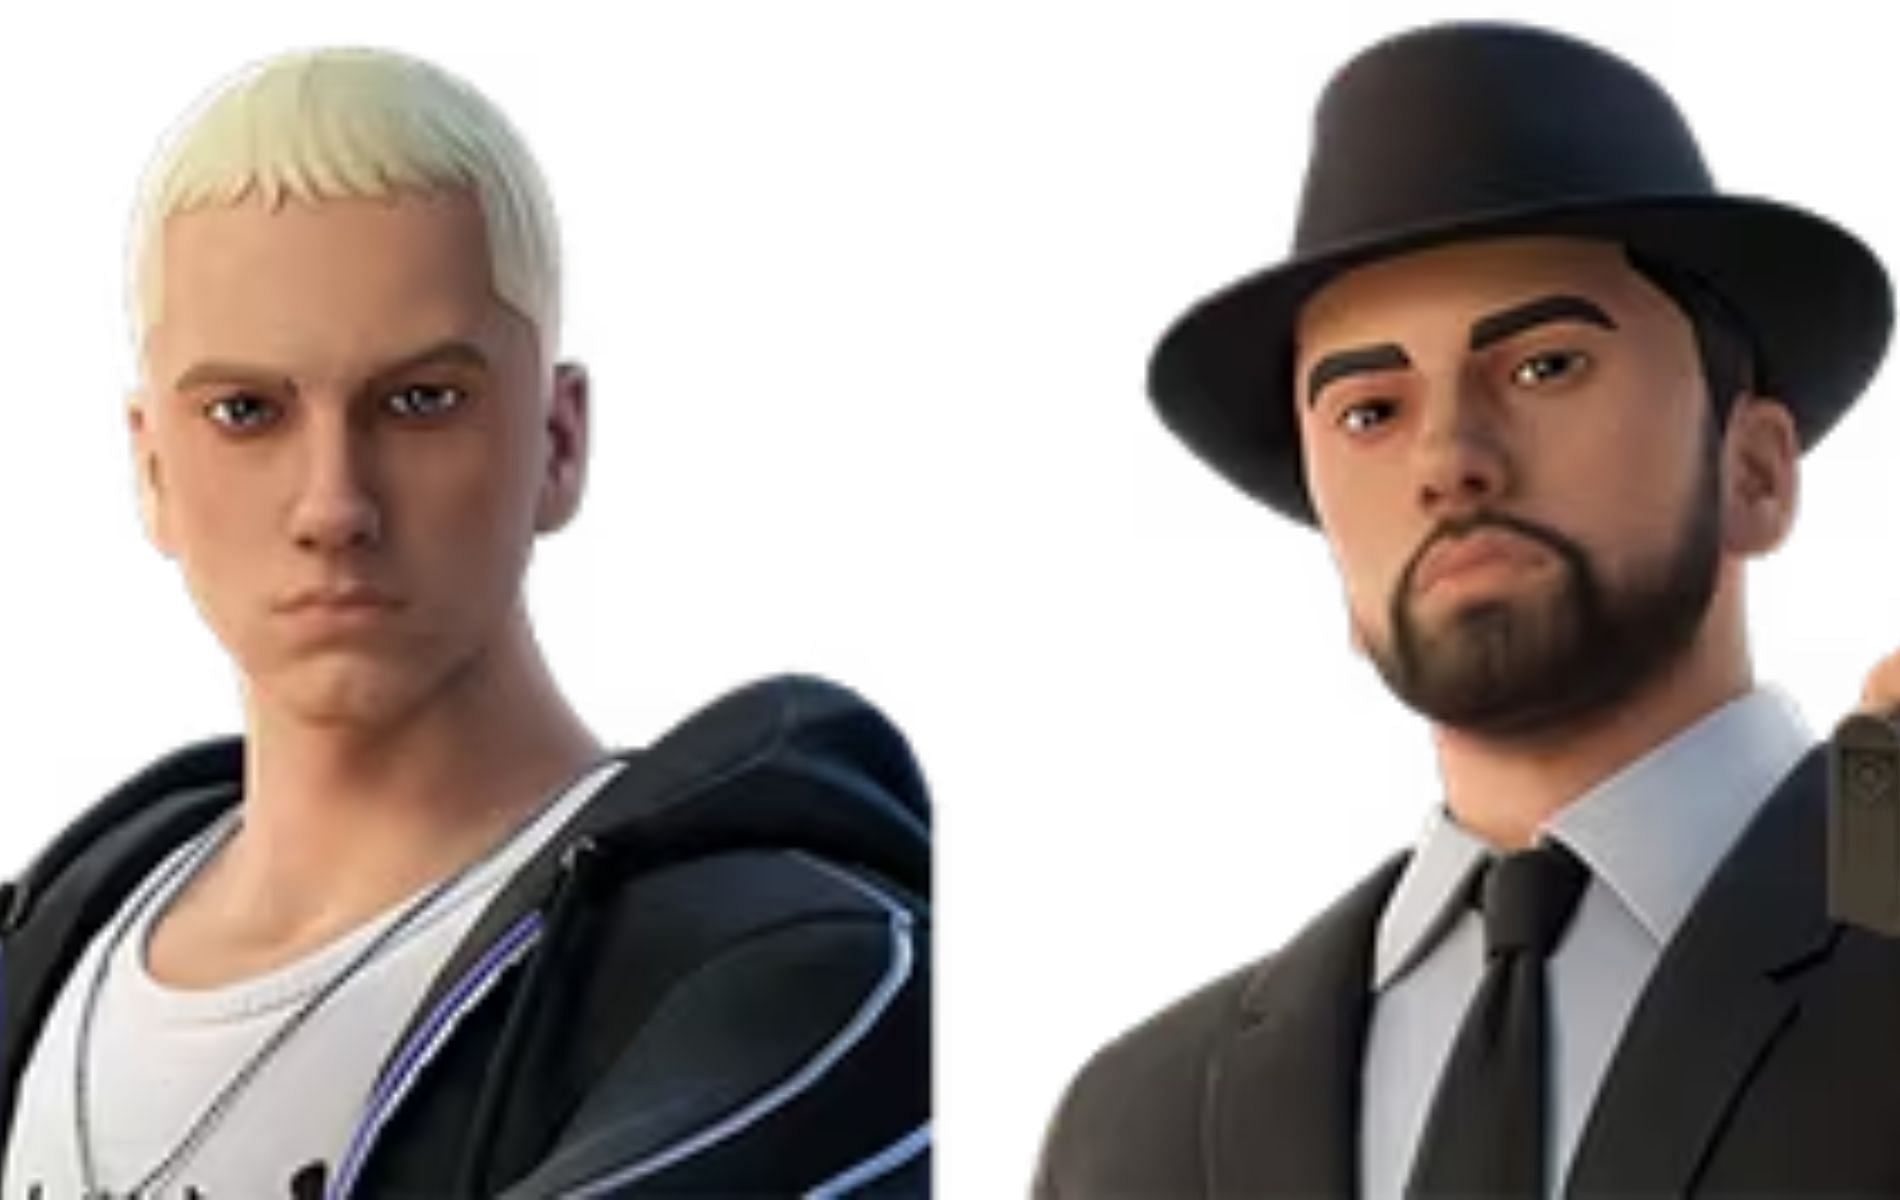 Eminem skins set to launch in the game (Image via X)